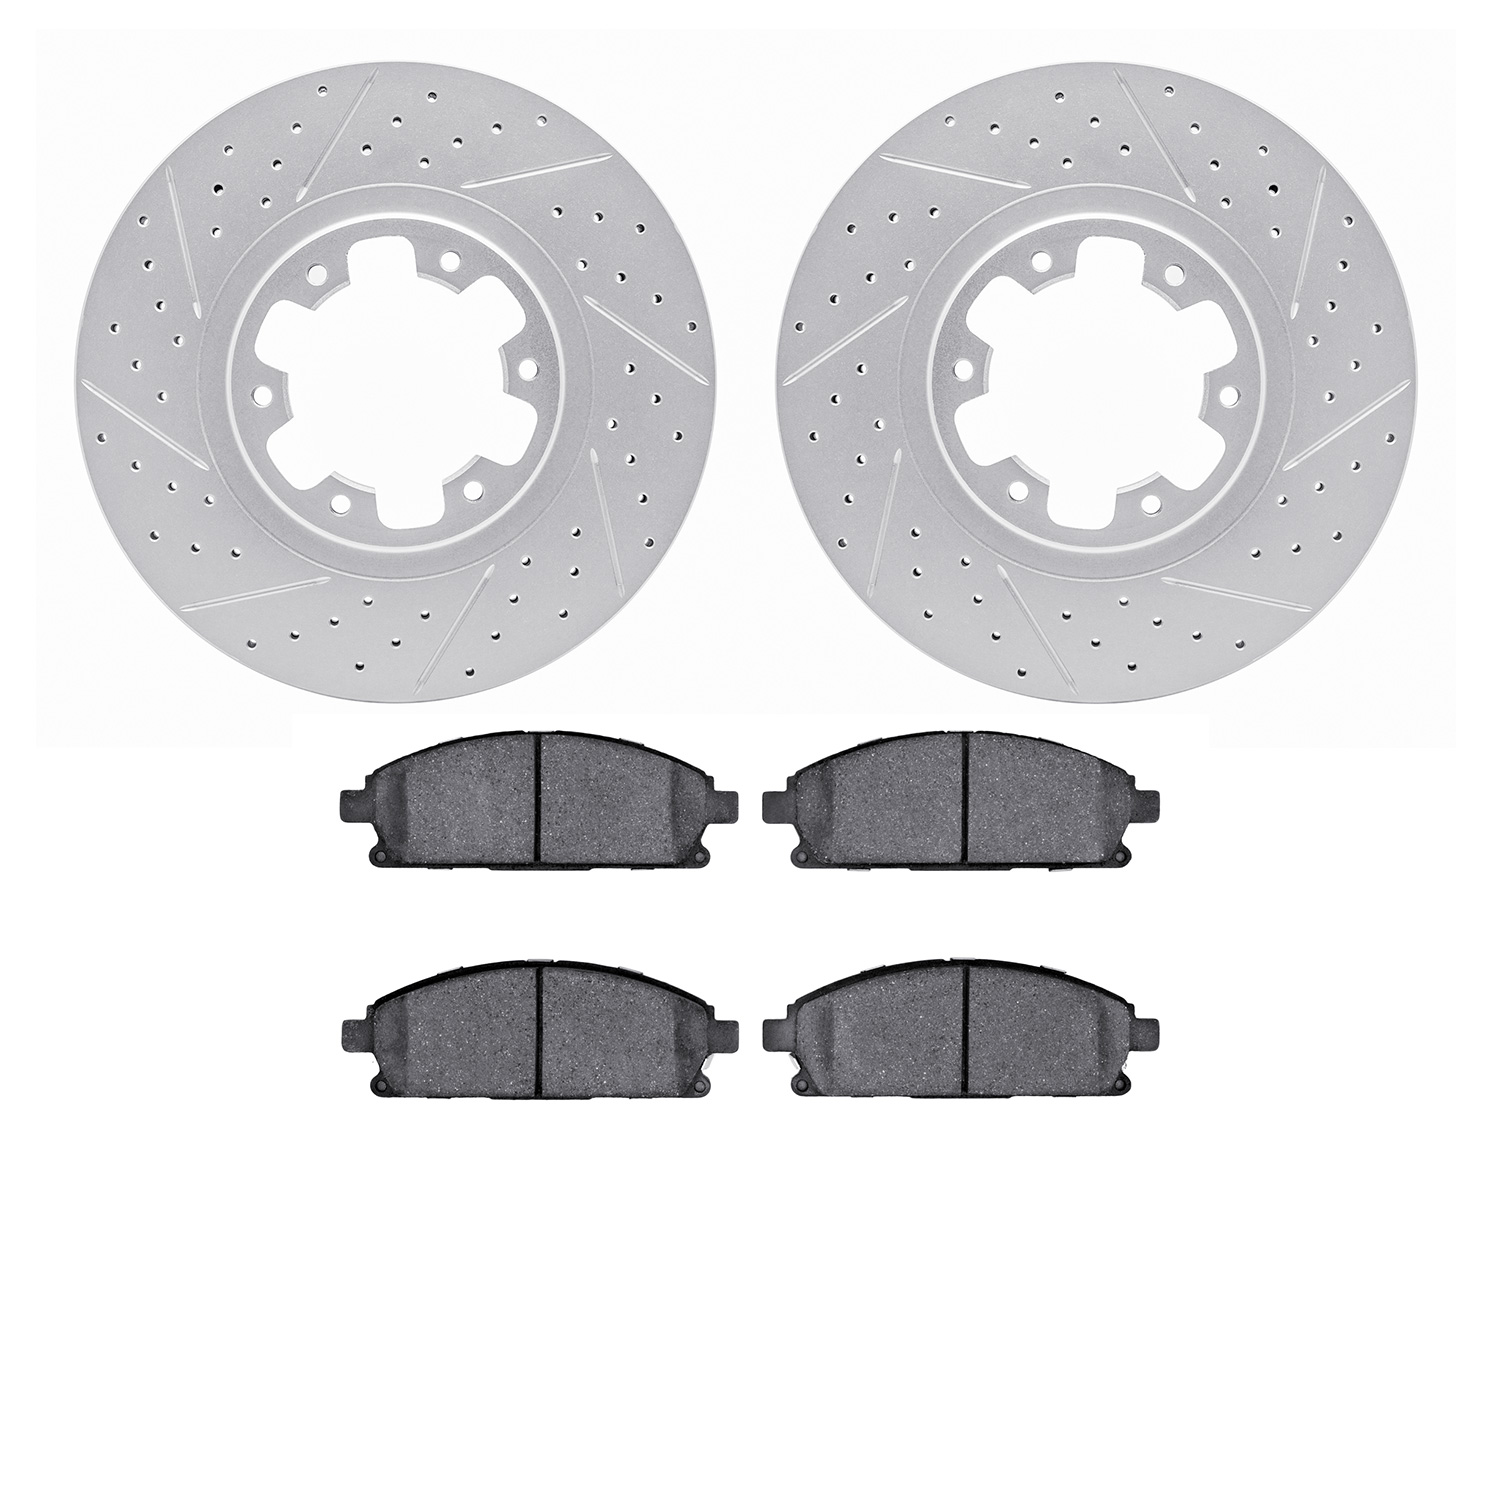 2502-67078 Geoperformance Drilled/Slotted Rotors w/5000 Advanced Brake Pads Kit, 1998-2004 Infiniti/Nissan, Position: Front